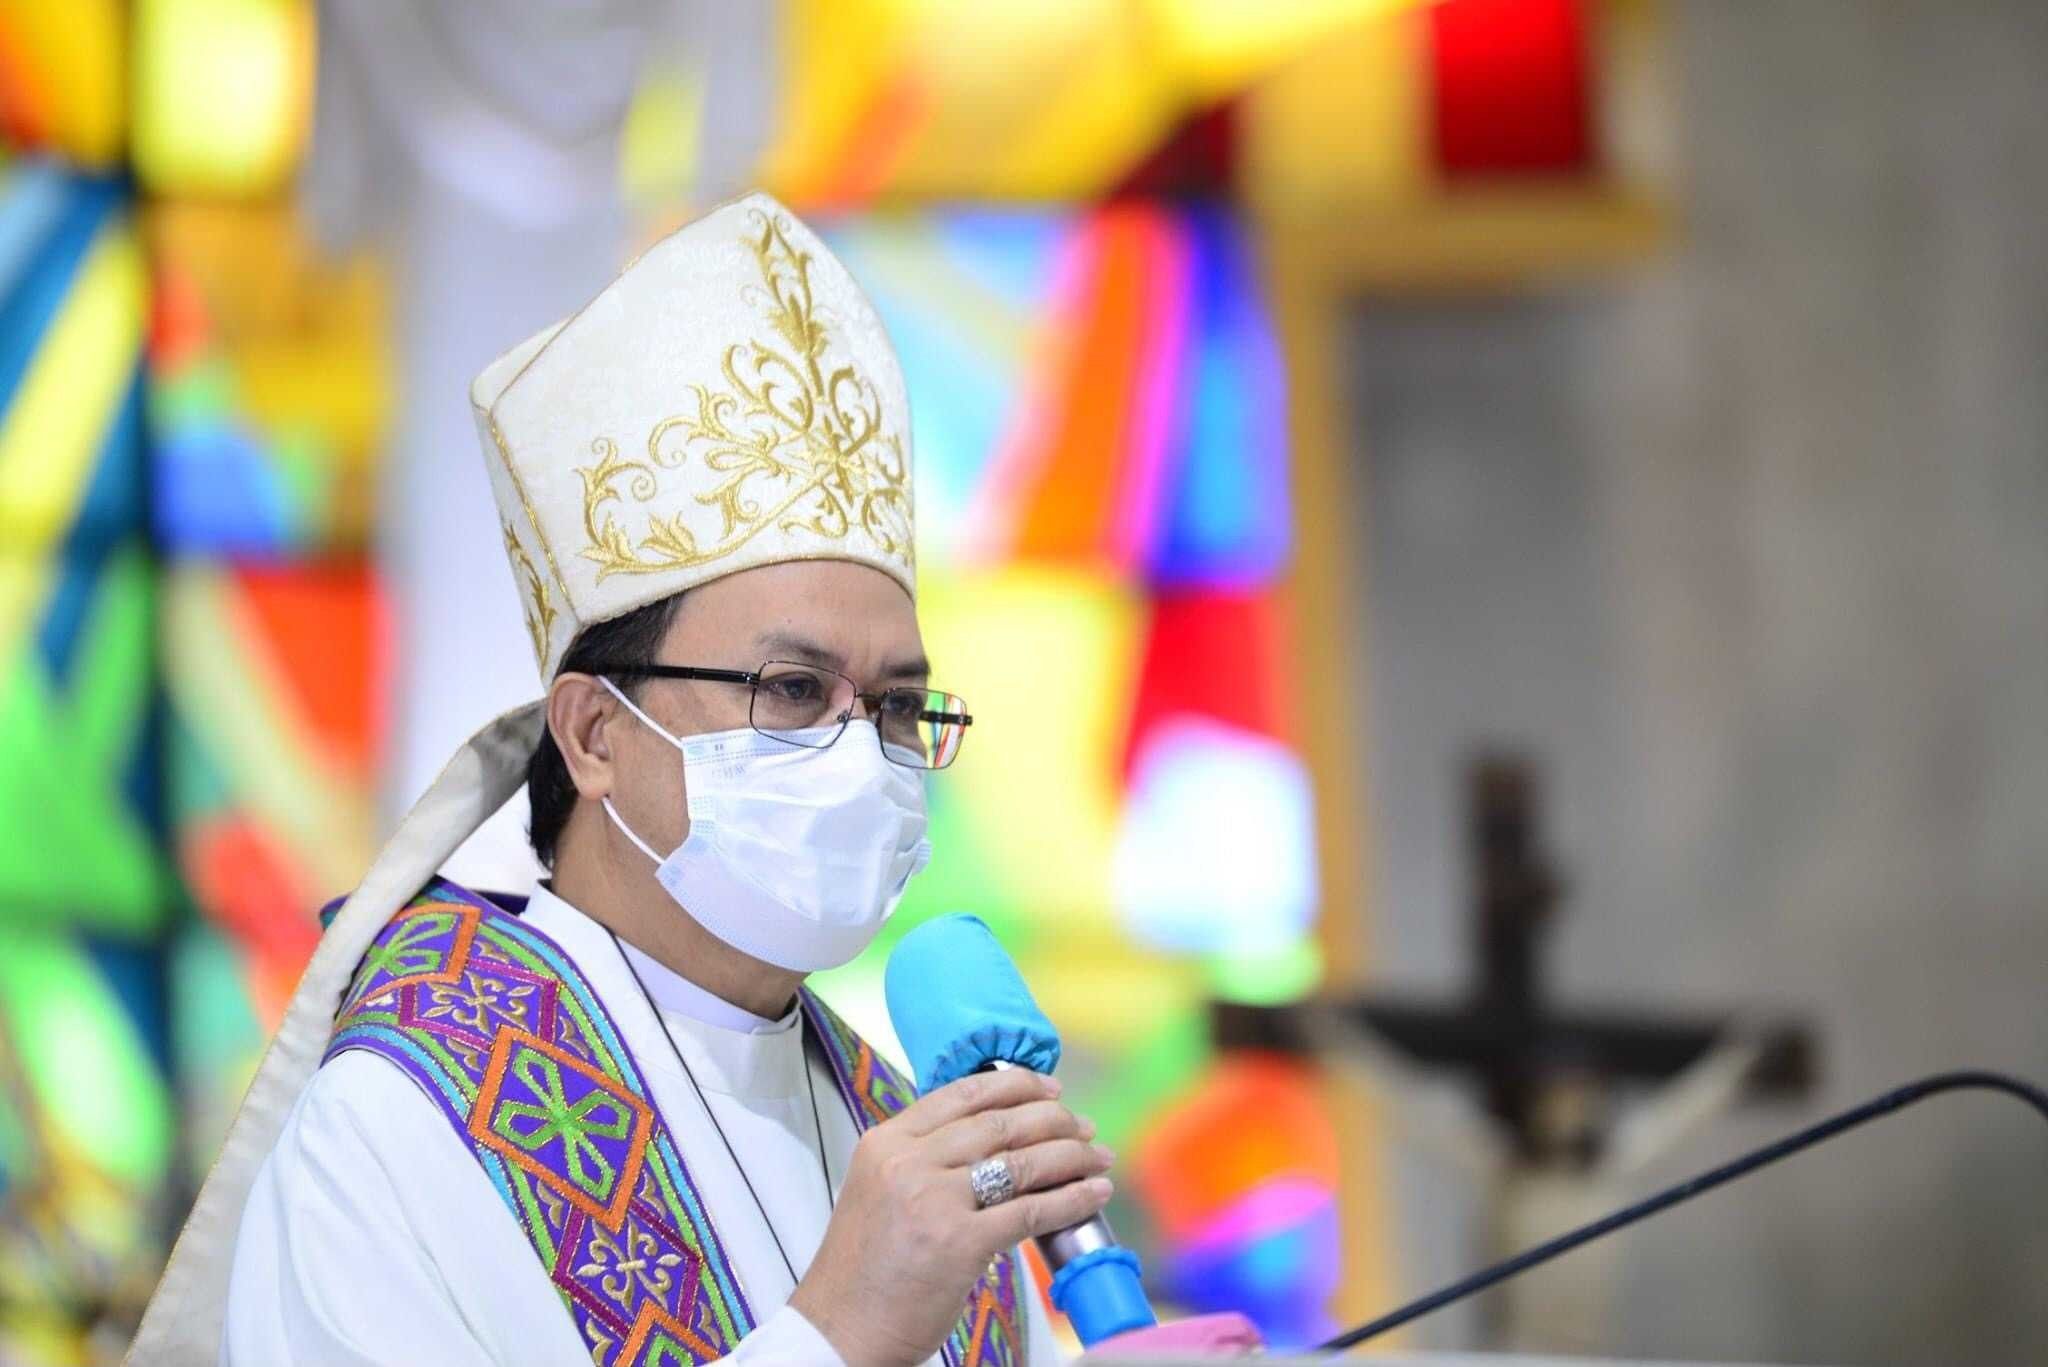 CBCP exec: Why ban Masses but allow gyms, spas in 'NCR Plus'?